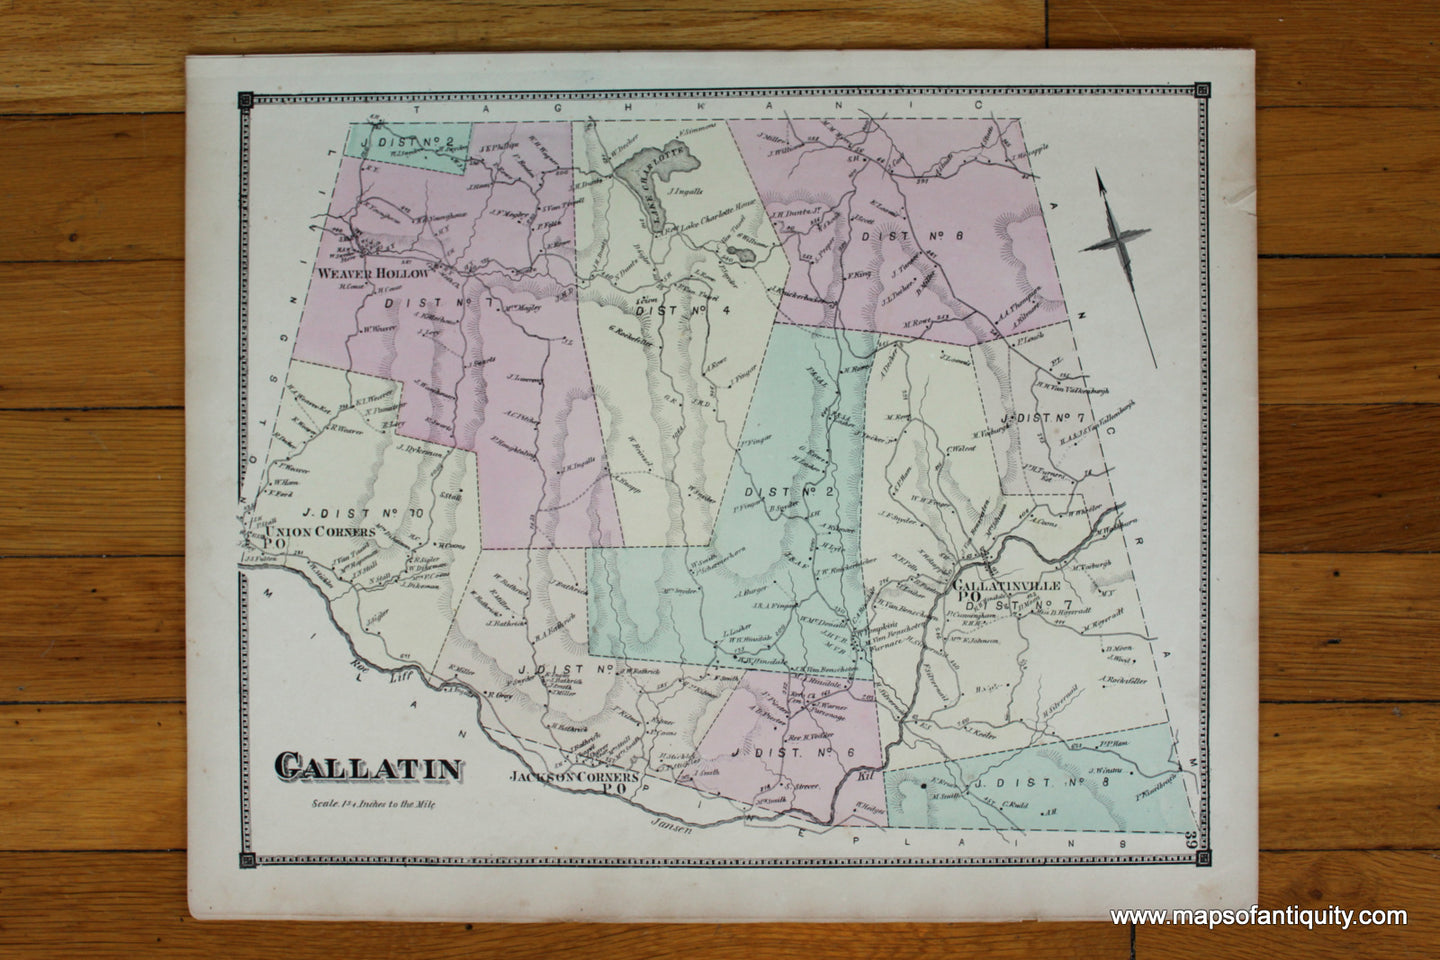 Antique-Hand-Colored-Map-Gallatin-(NY)-United-States-Northeast-1873-Beers-Maps-Of-Antiquity